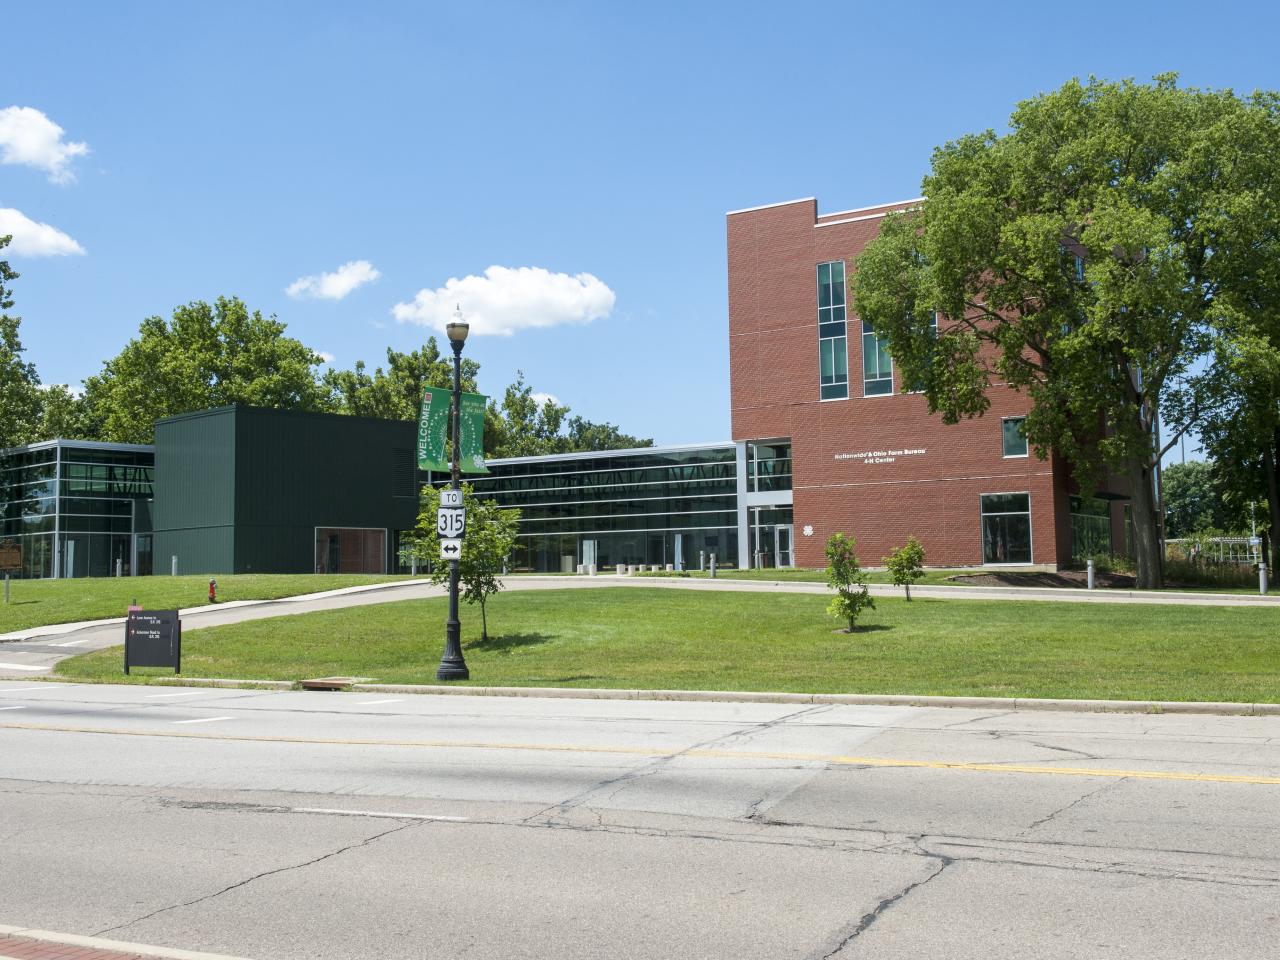 Another exterior view of the 4-H Center